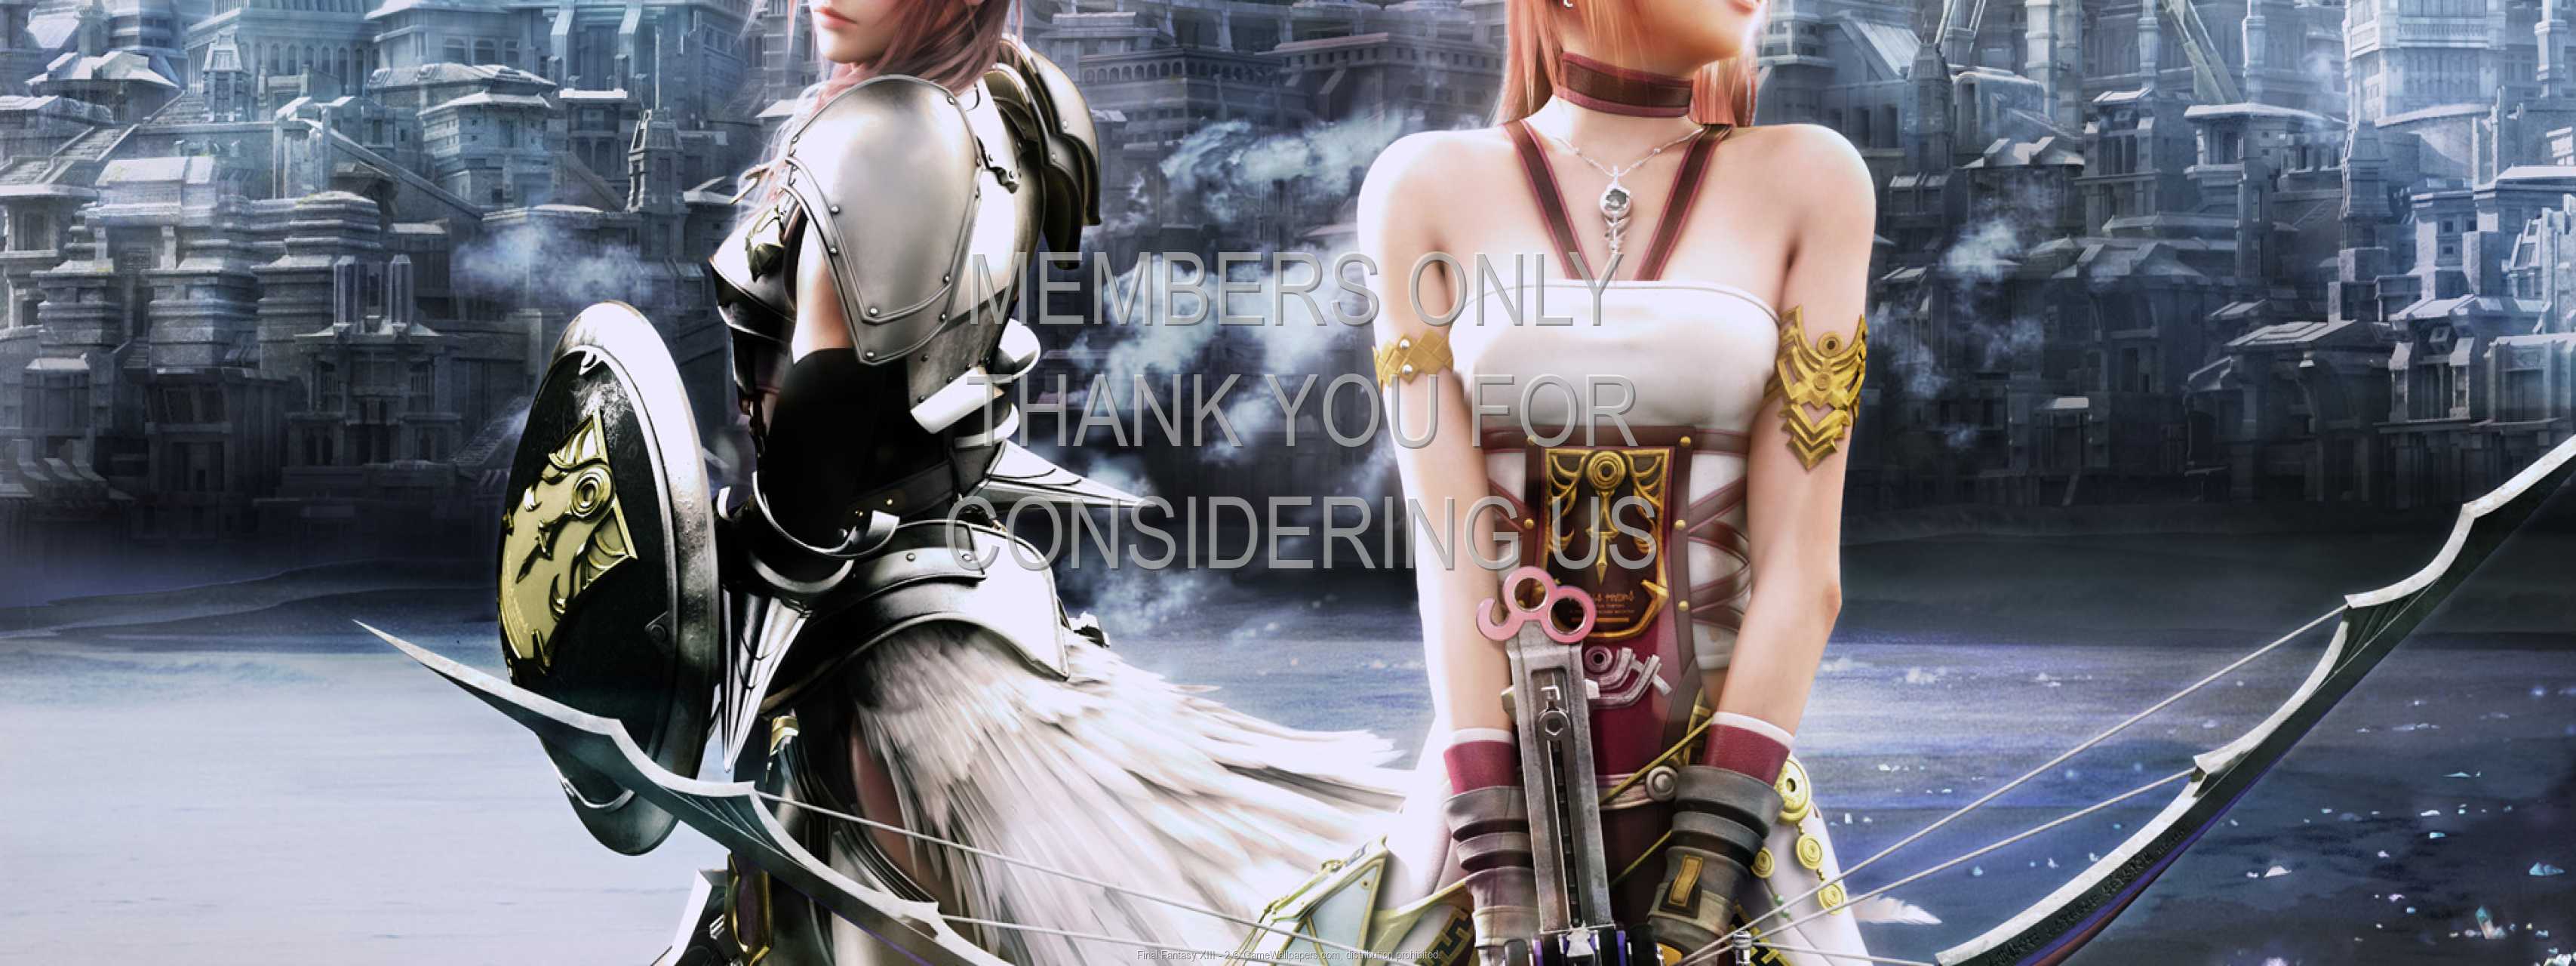 Final Fantasy XIII - 2 720p Horizontal Mobile wallpaper or background 01